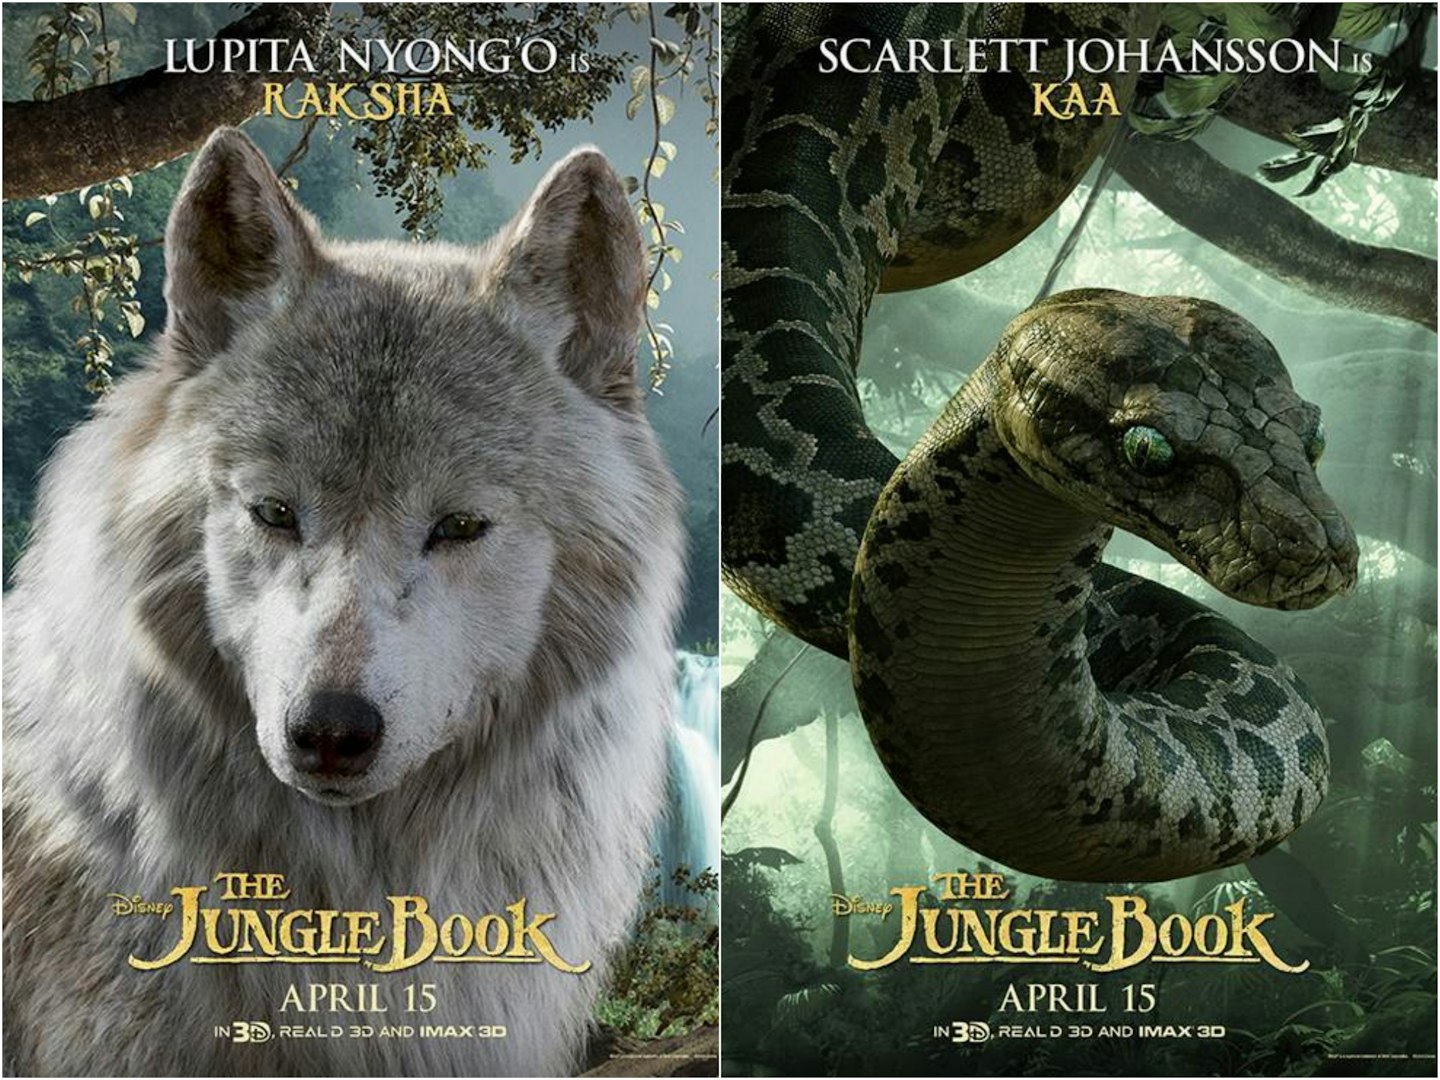 The Jungle Book character posters